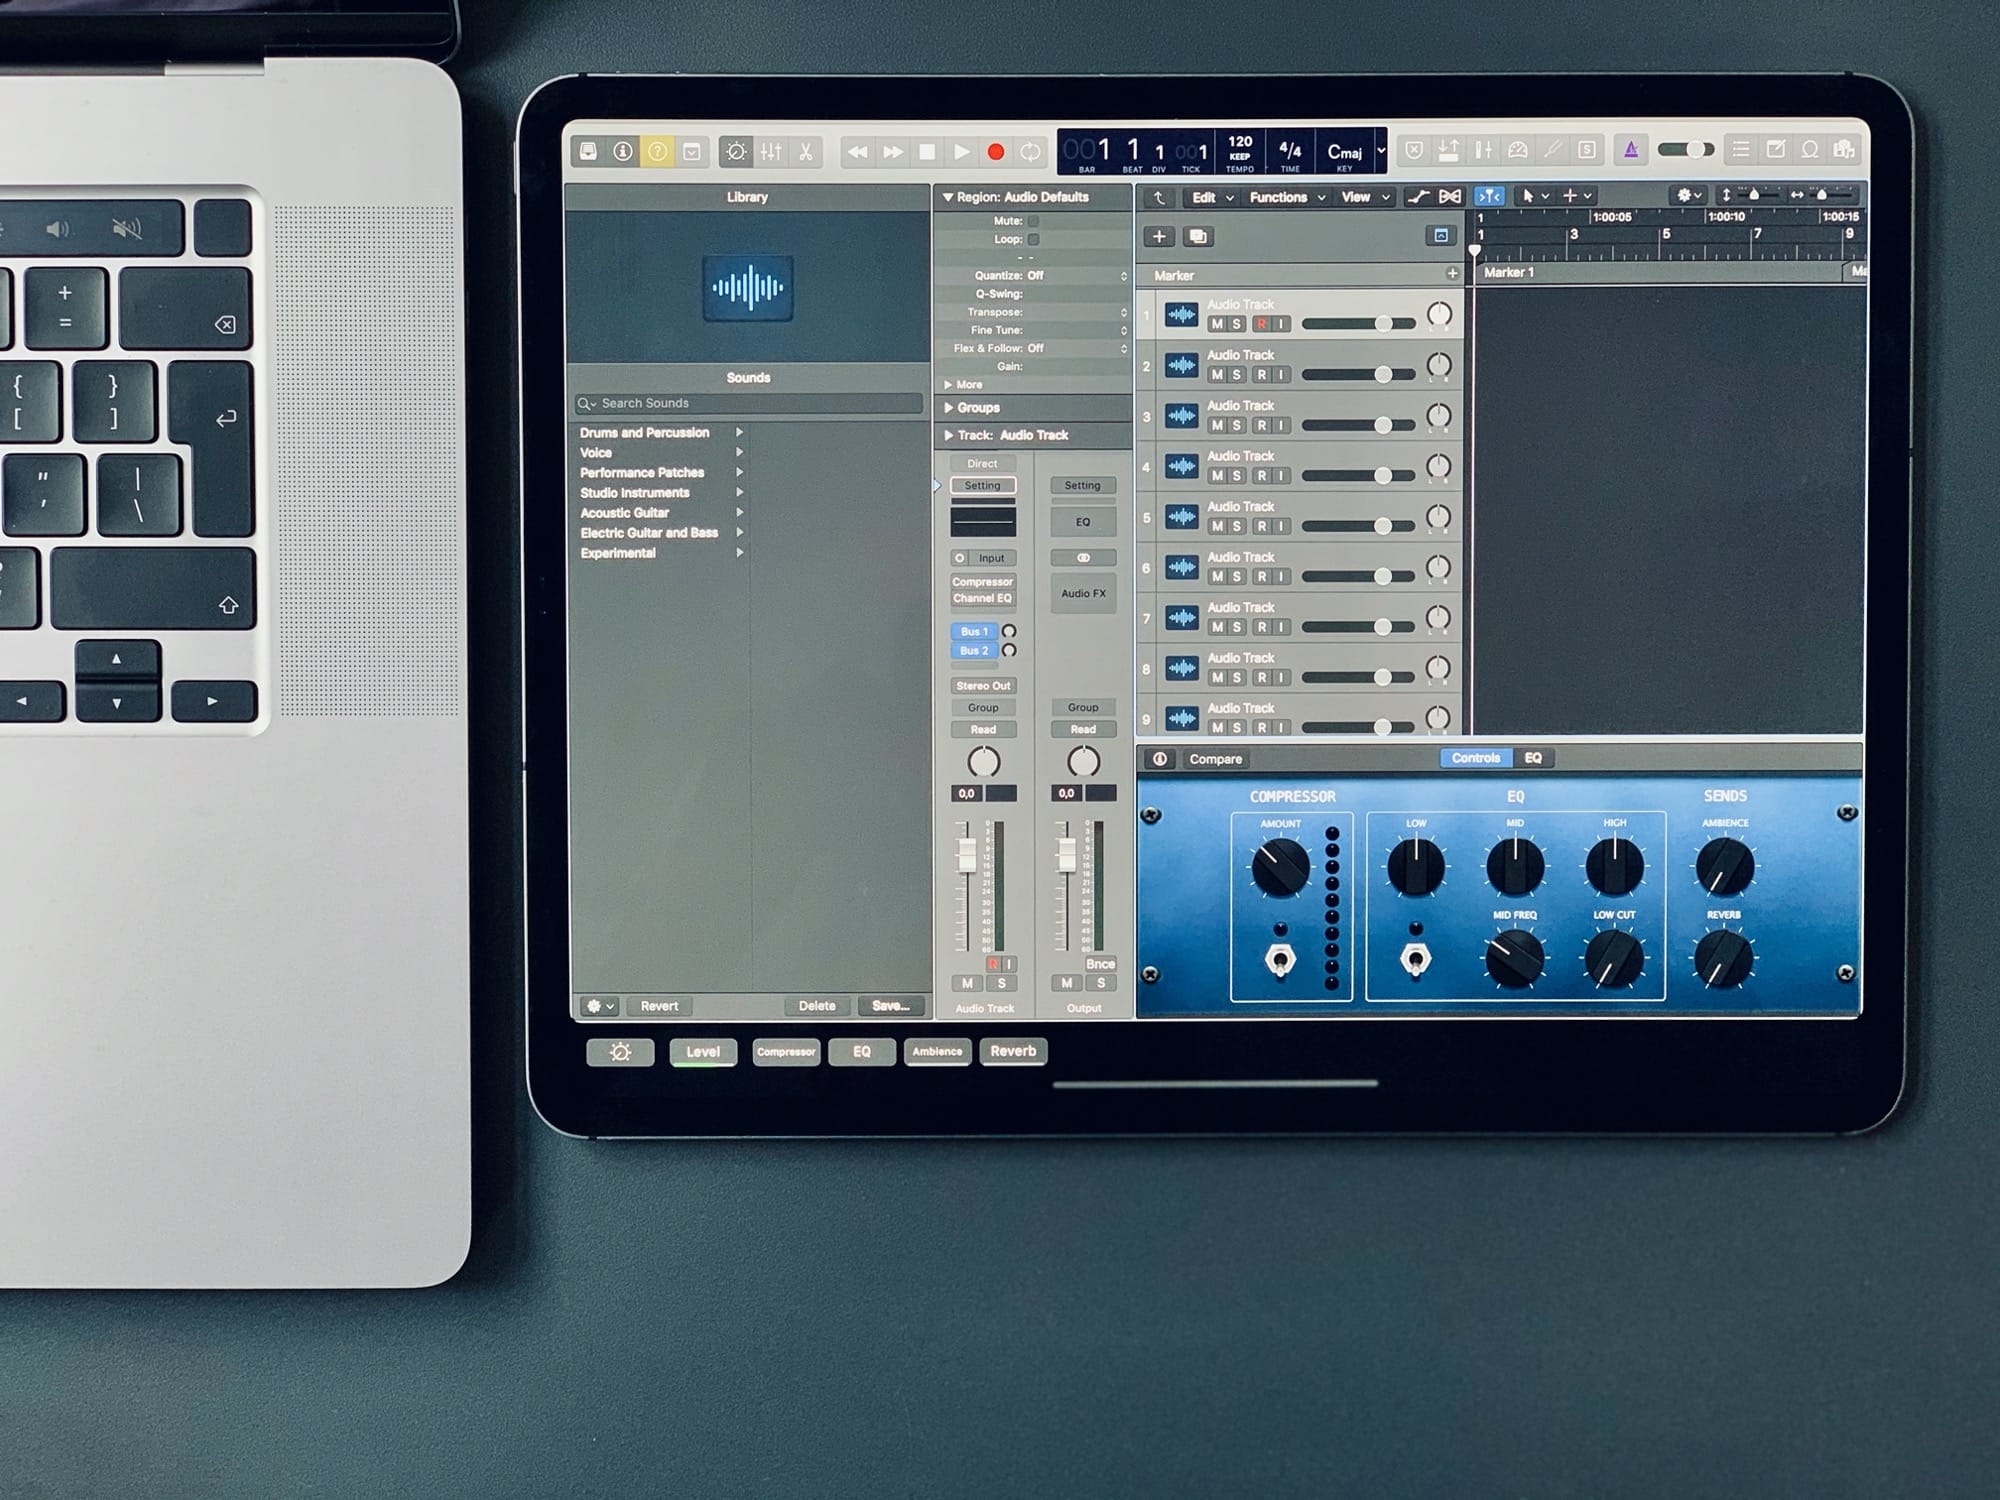 Yes, that's Logic Pro X 'running' on an iPad.